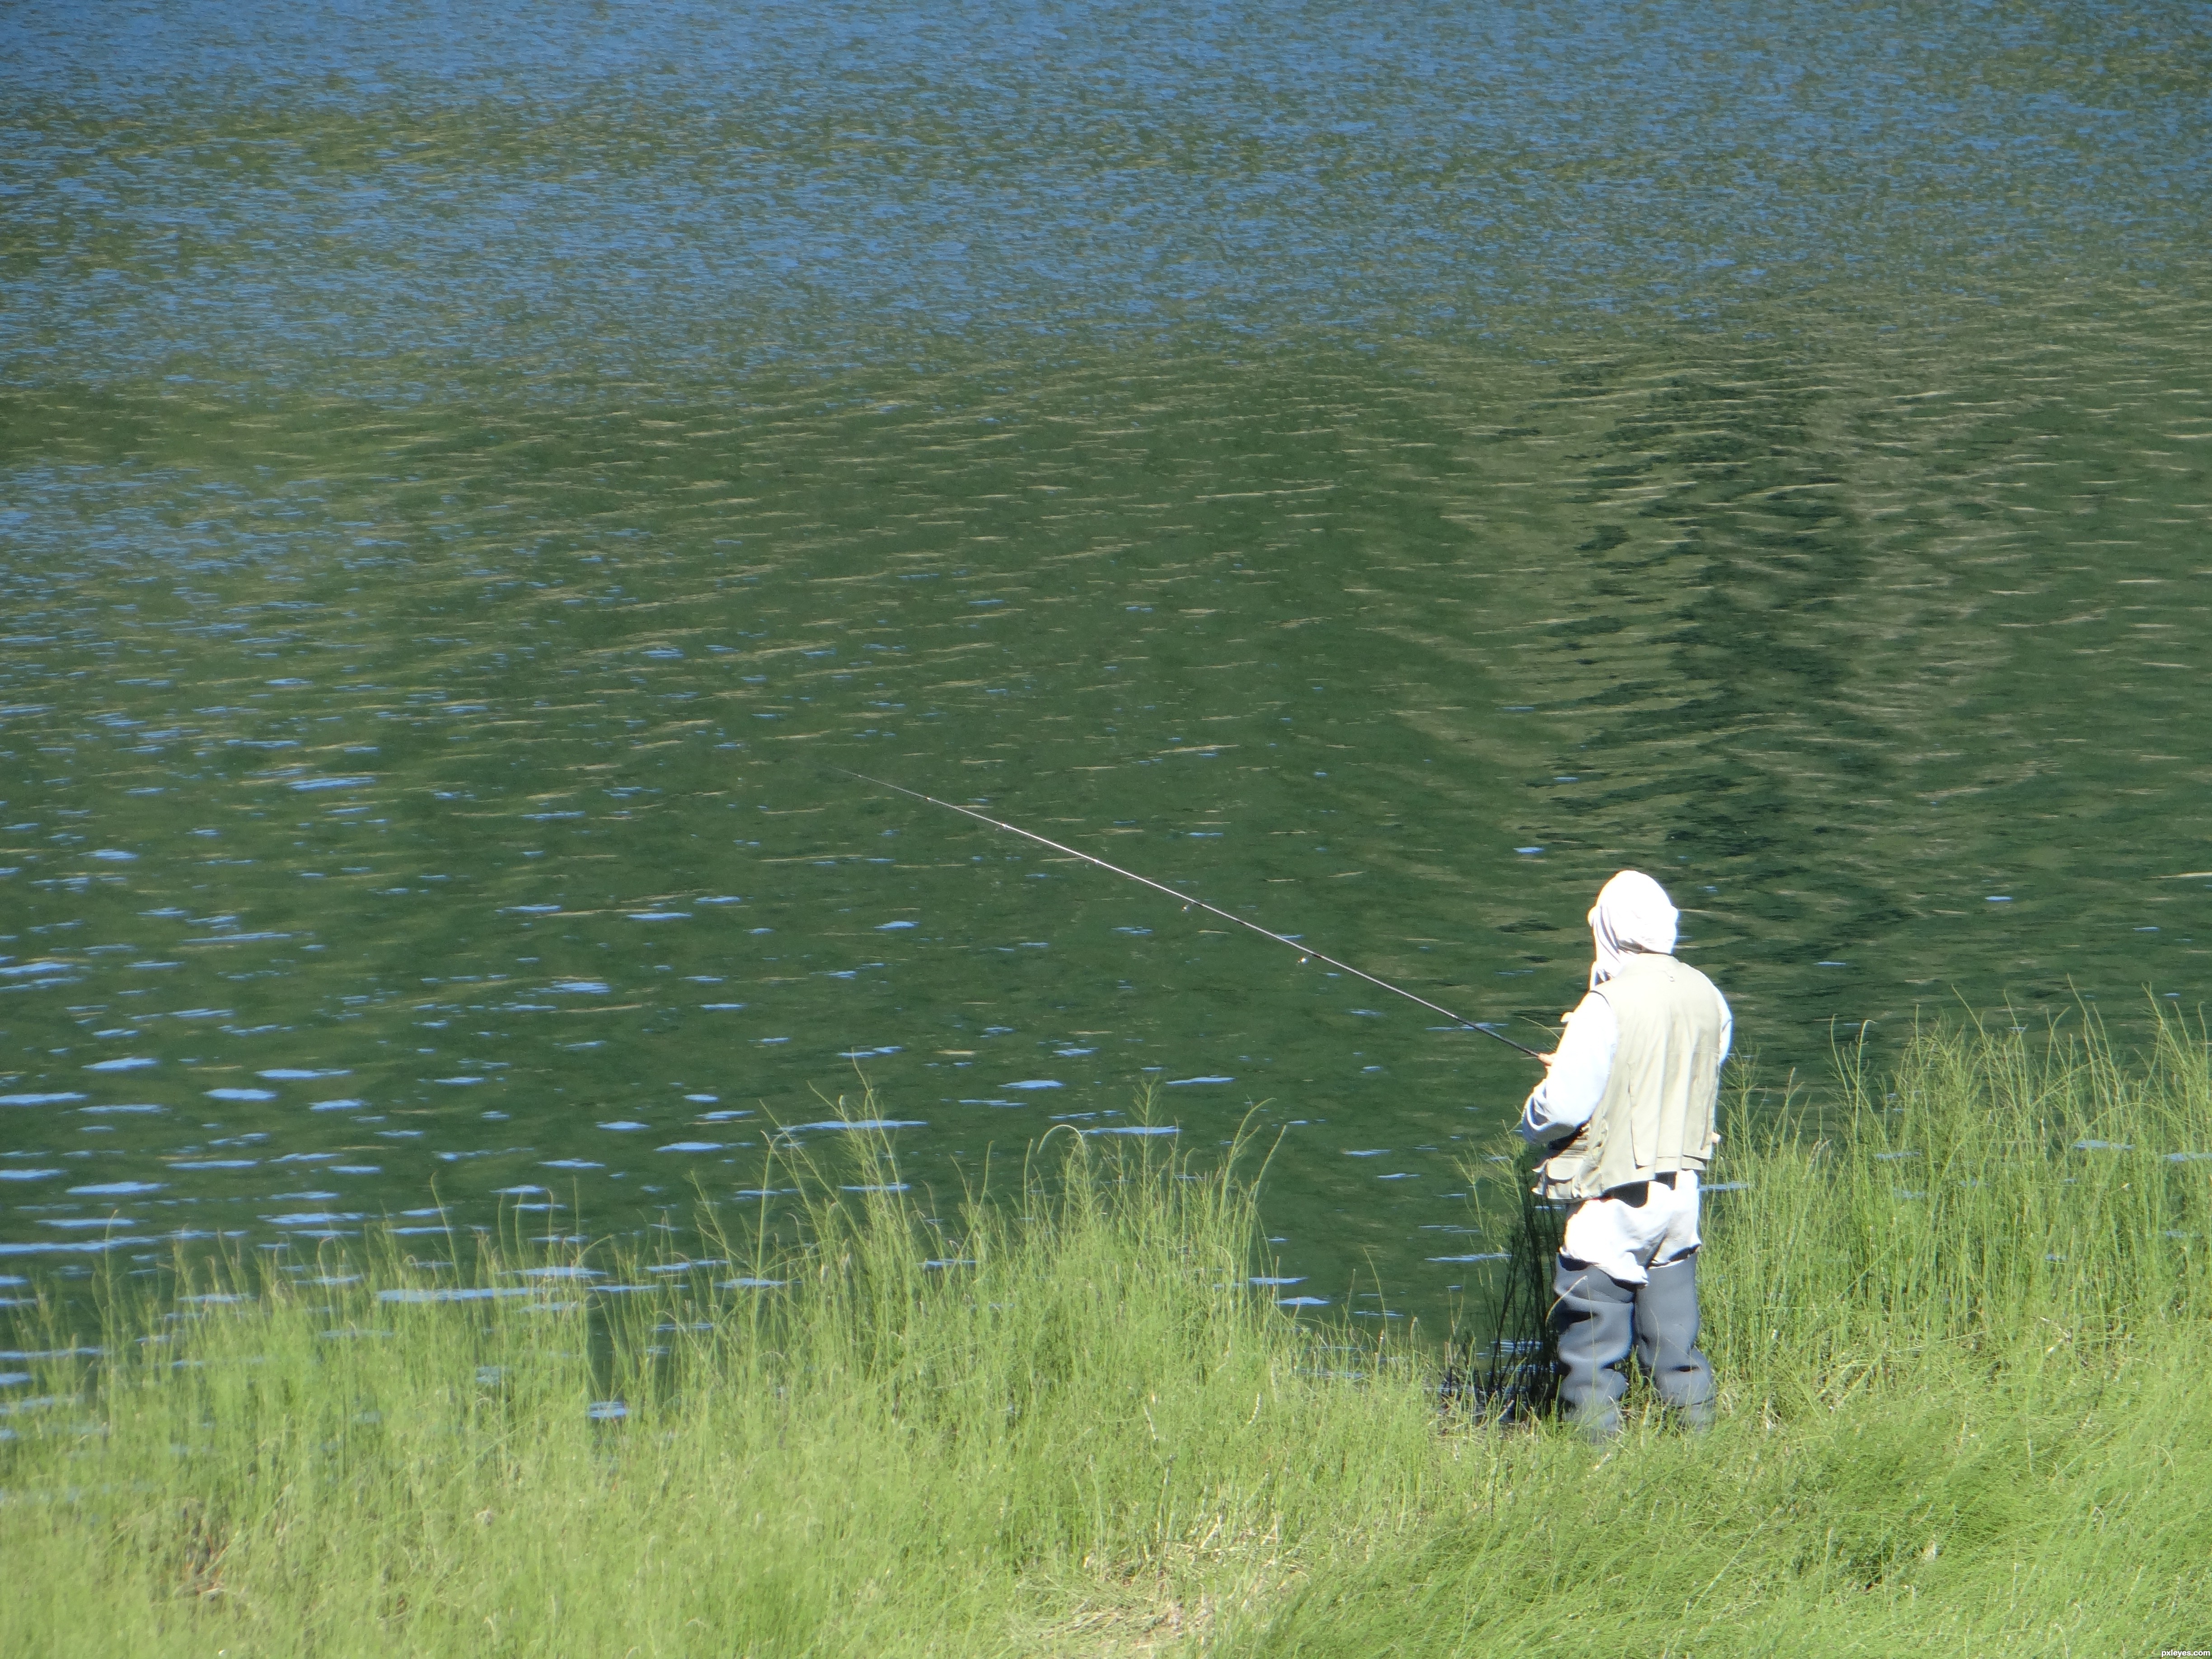 Grandpa fishing picture, by Good0guy for: gone fishing photography